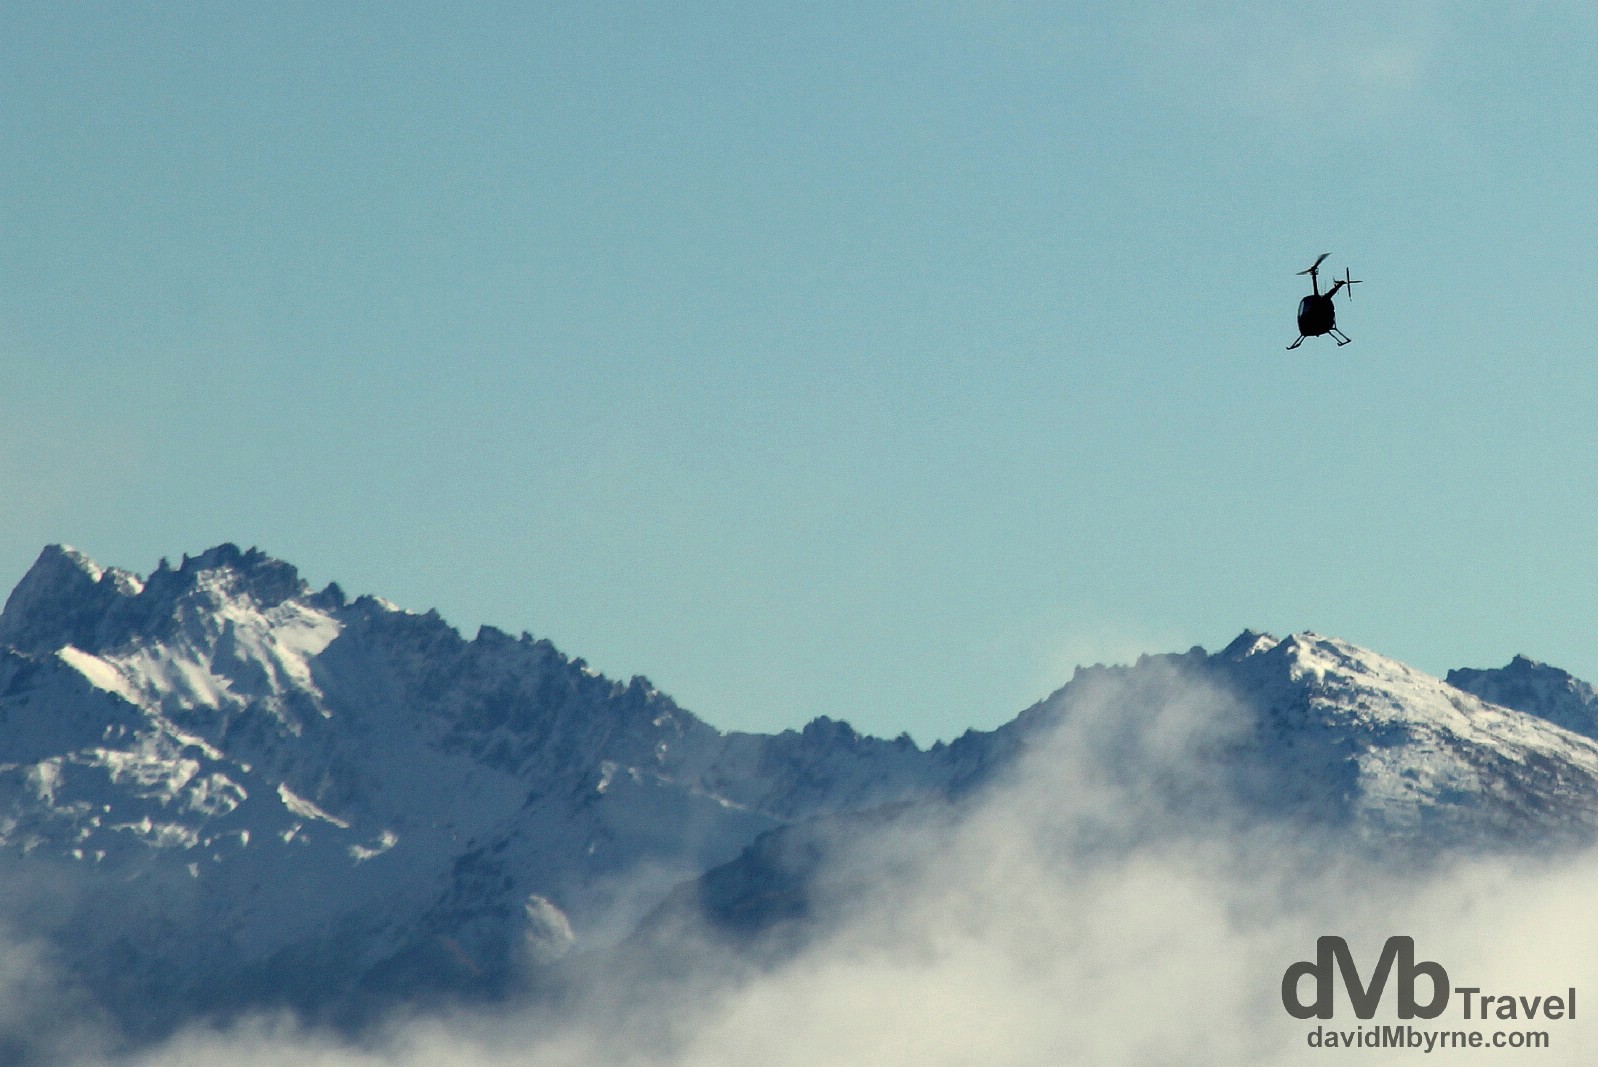 A helicopter leaving Wanaka airport, South Island, New Zealand. May 22nd 2012.